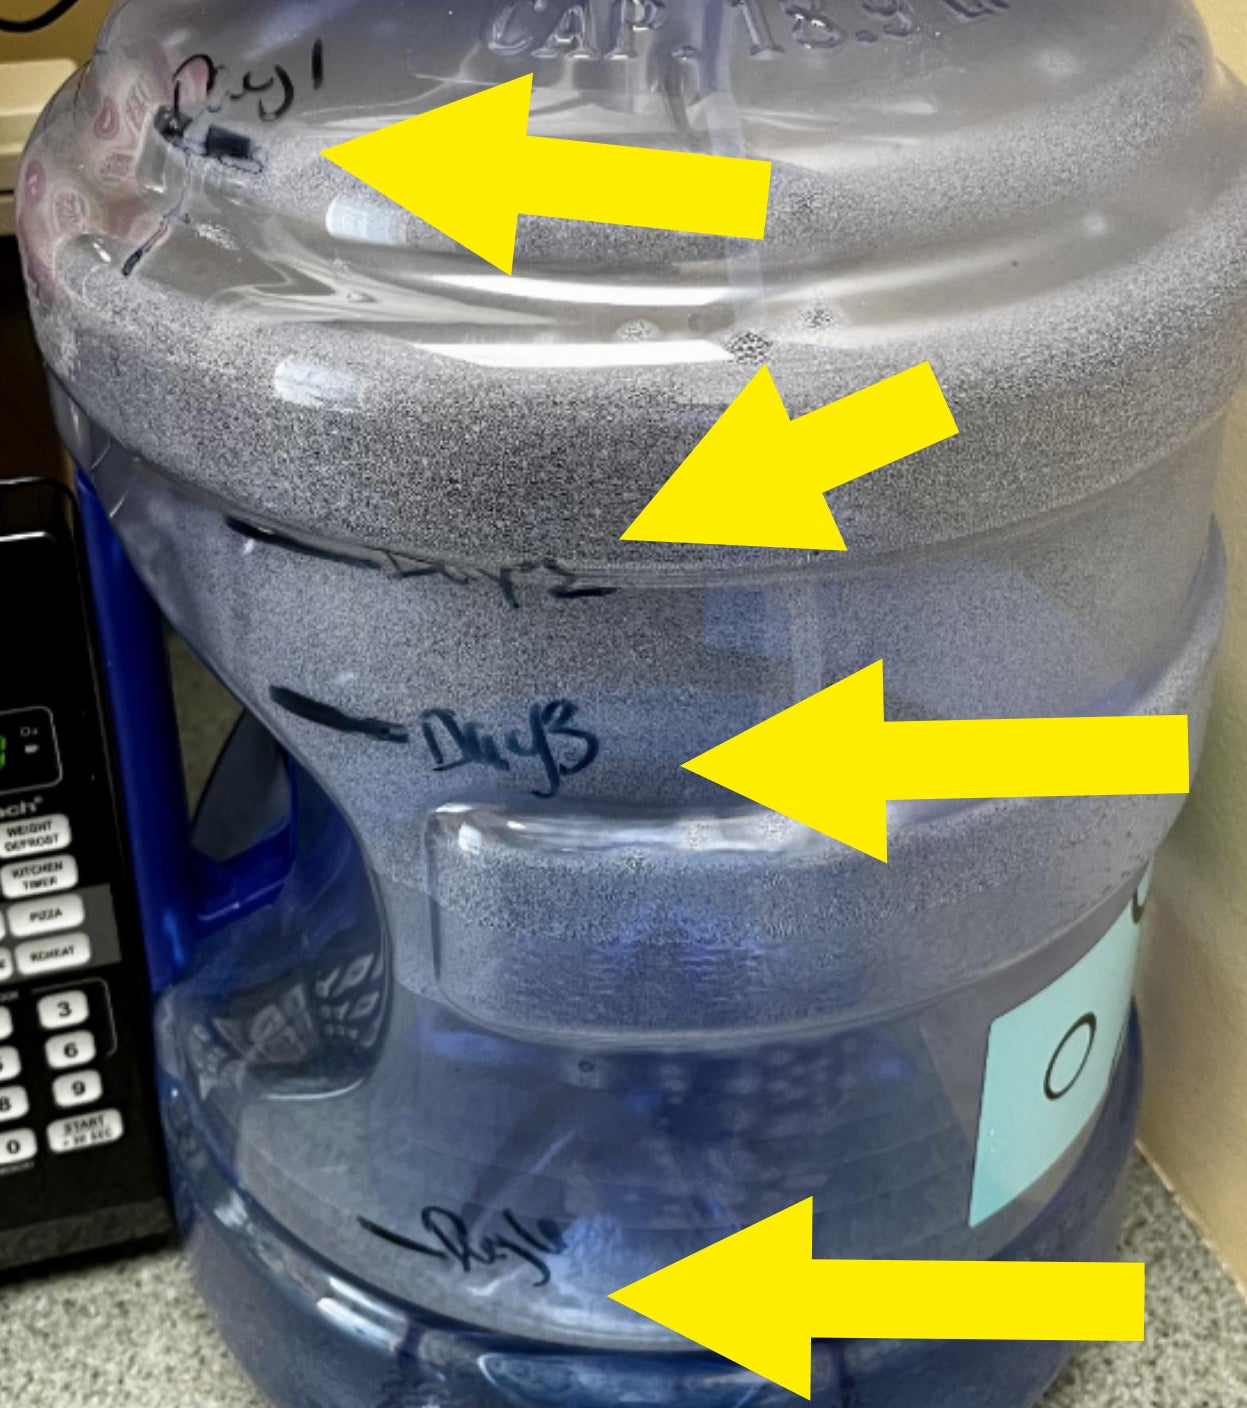 Marks on a water jug to show how much water should be consumed in a day